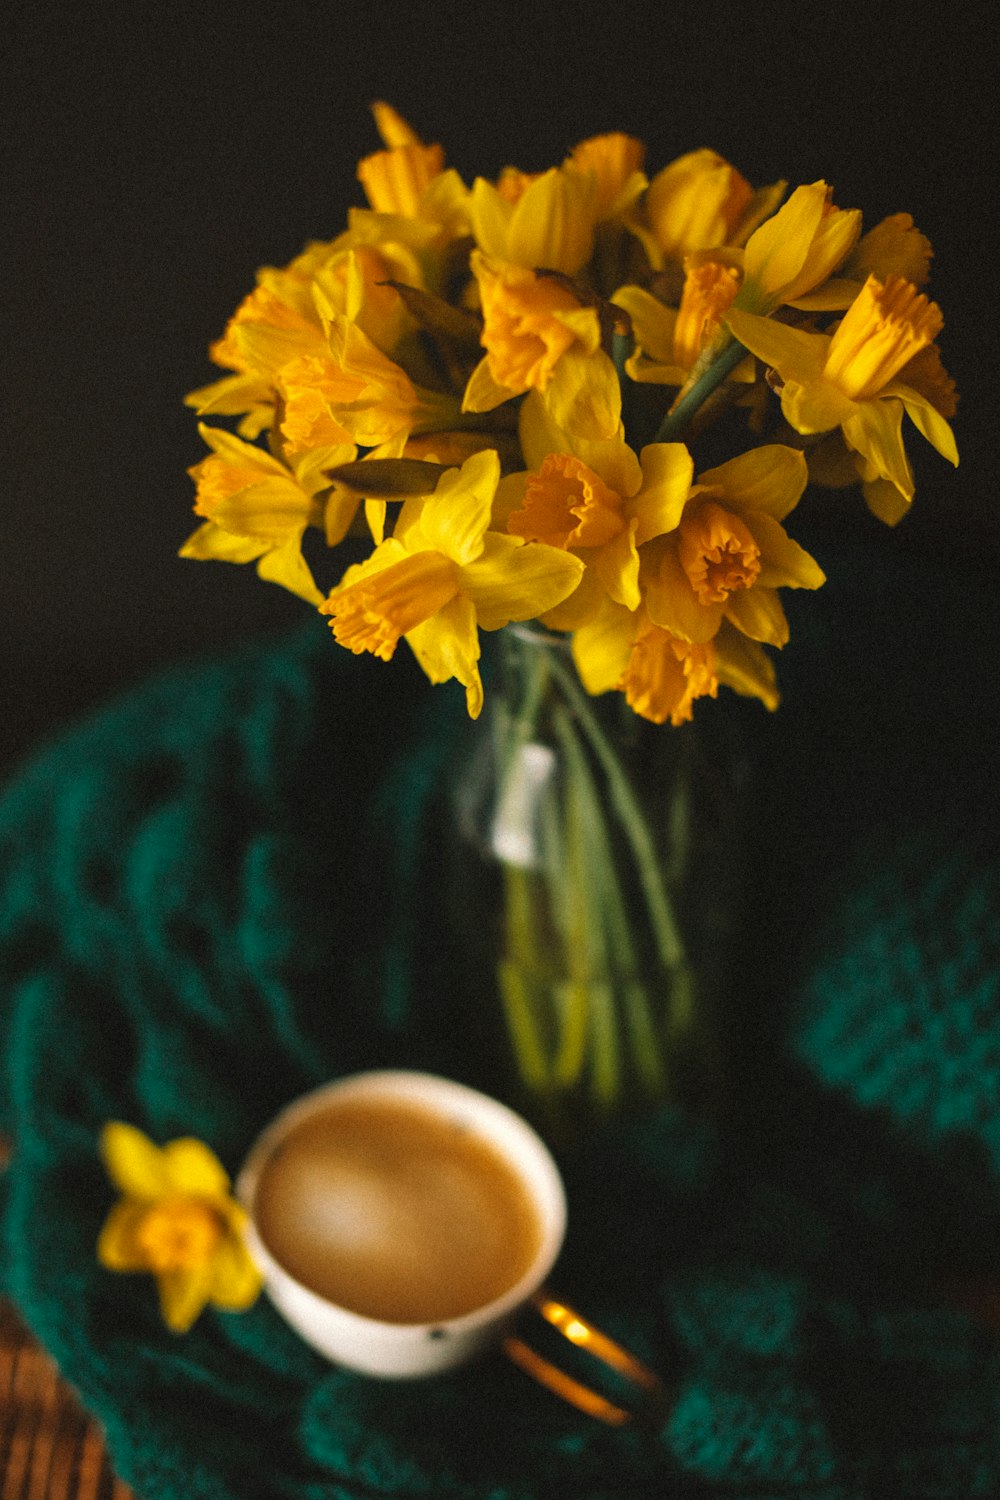 a glass vase filled with yellow flowers next to a cup of coffee